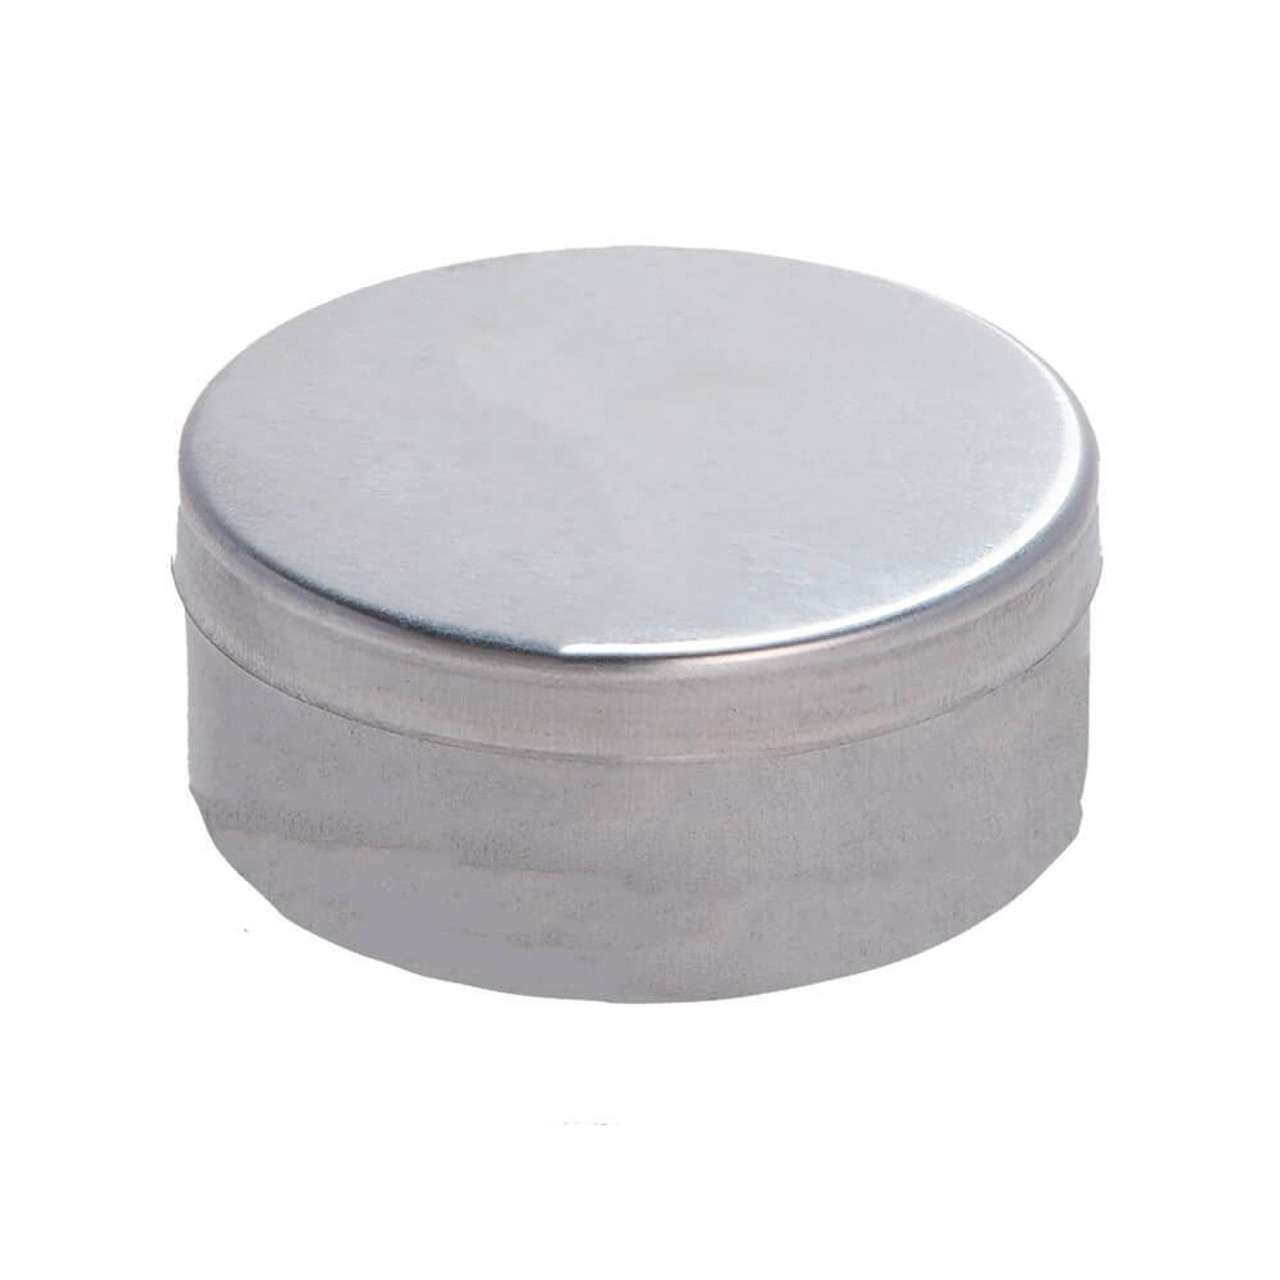 https://cdn11.bigcommerce.com/s-zgzol/images/stencil/1280x1280/products/9153/238574/gilson-company-sample-containers-aluminum-1.5oz-12pk__60130.1700978507.jpg?c=2